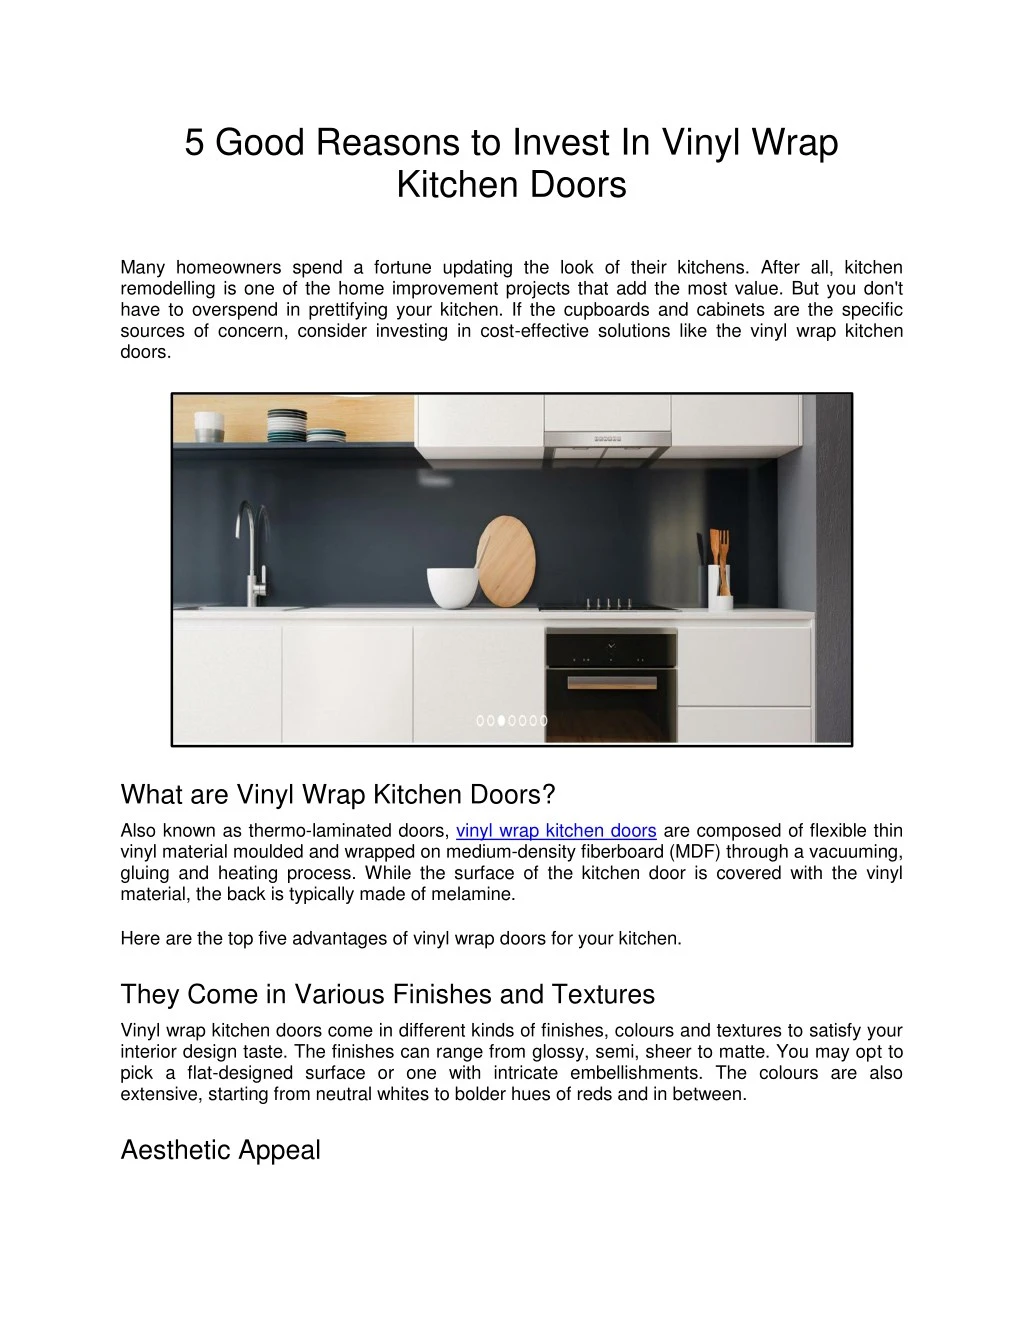 5 good reasons to invest in vinyl wrap kitchen